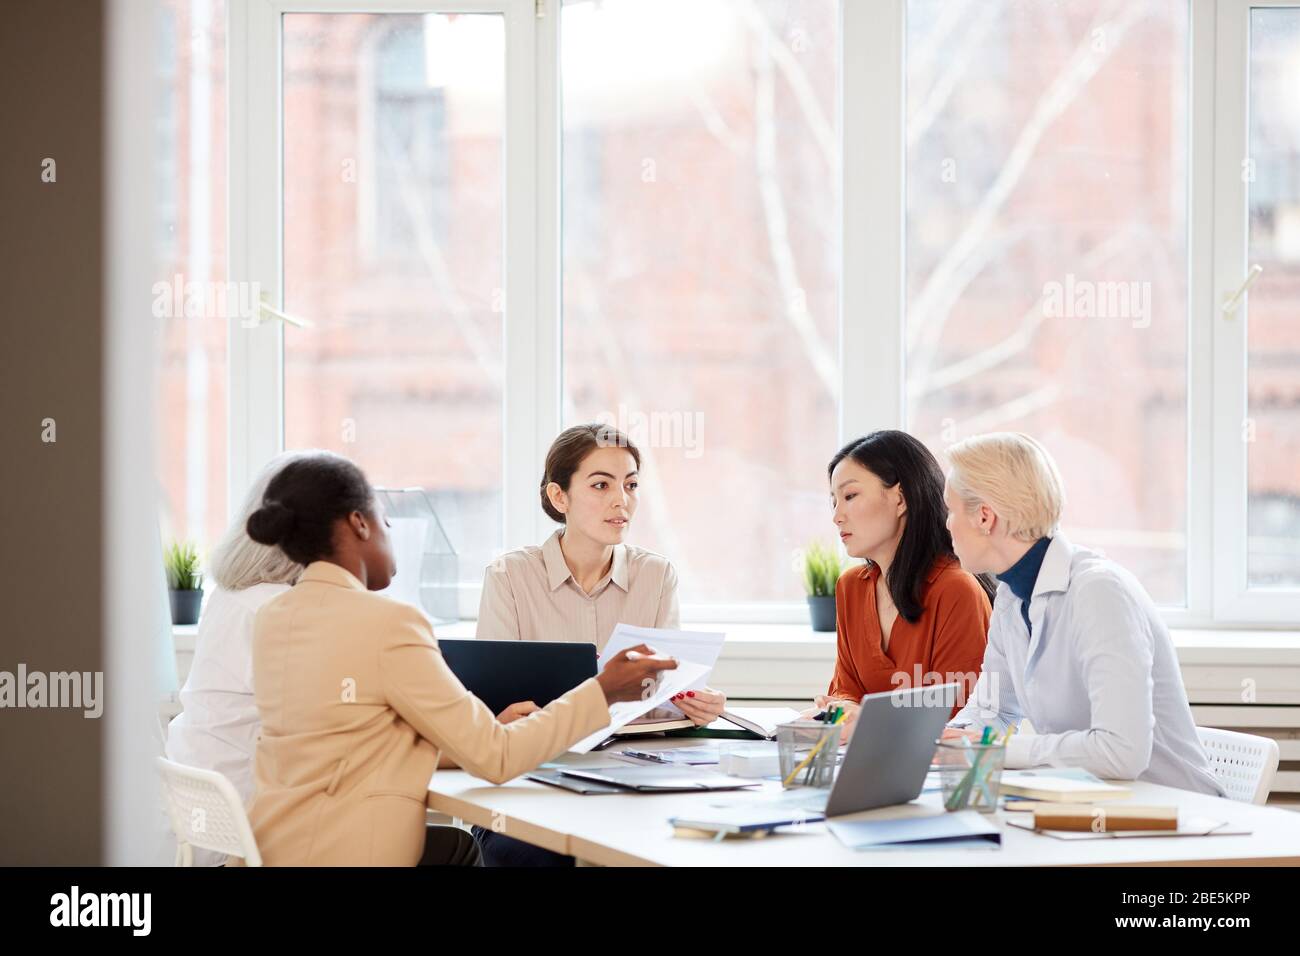 Wide angle view at diverse female business team discussing project while sitting at table during meeting in conference room, copy space Stock Photo